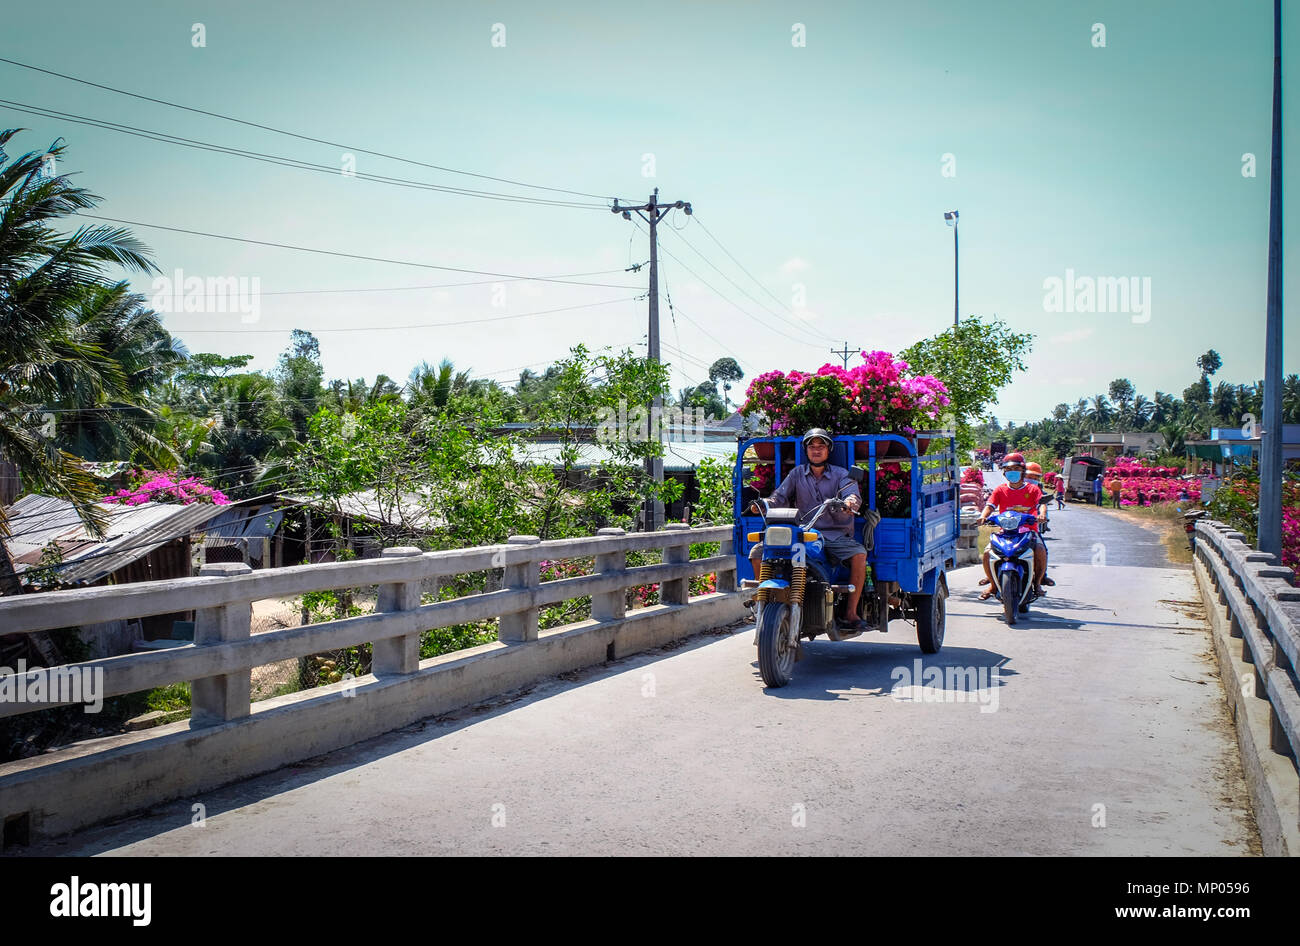 Can Tho, Vietnam - Jan 31, 2016. A small truck carrying flowers at spring time in Can Tho, Vietnam. Stock Photo